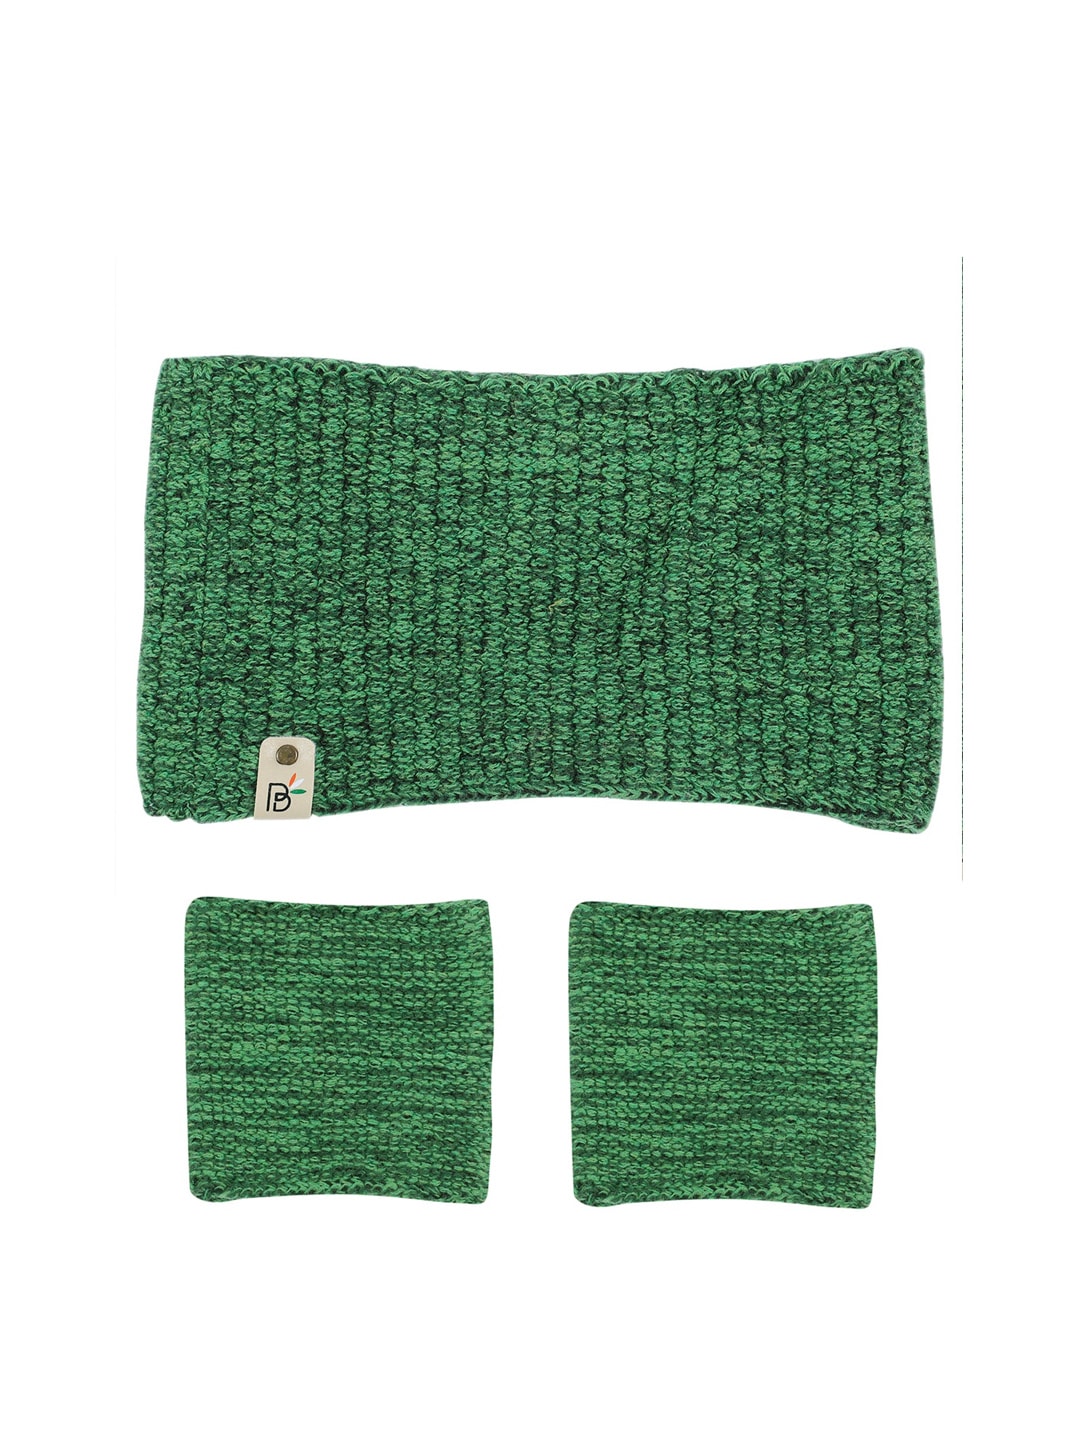 Bharatasya Set Of 2 Green Knitted Headband and Wristbands Price in India